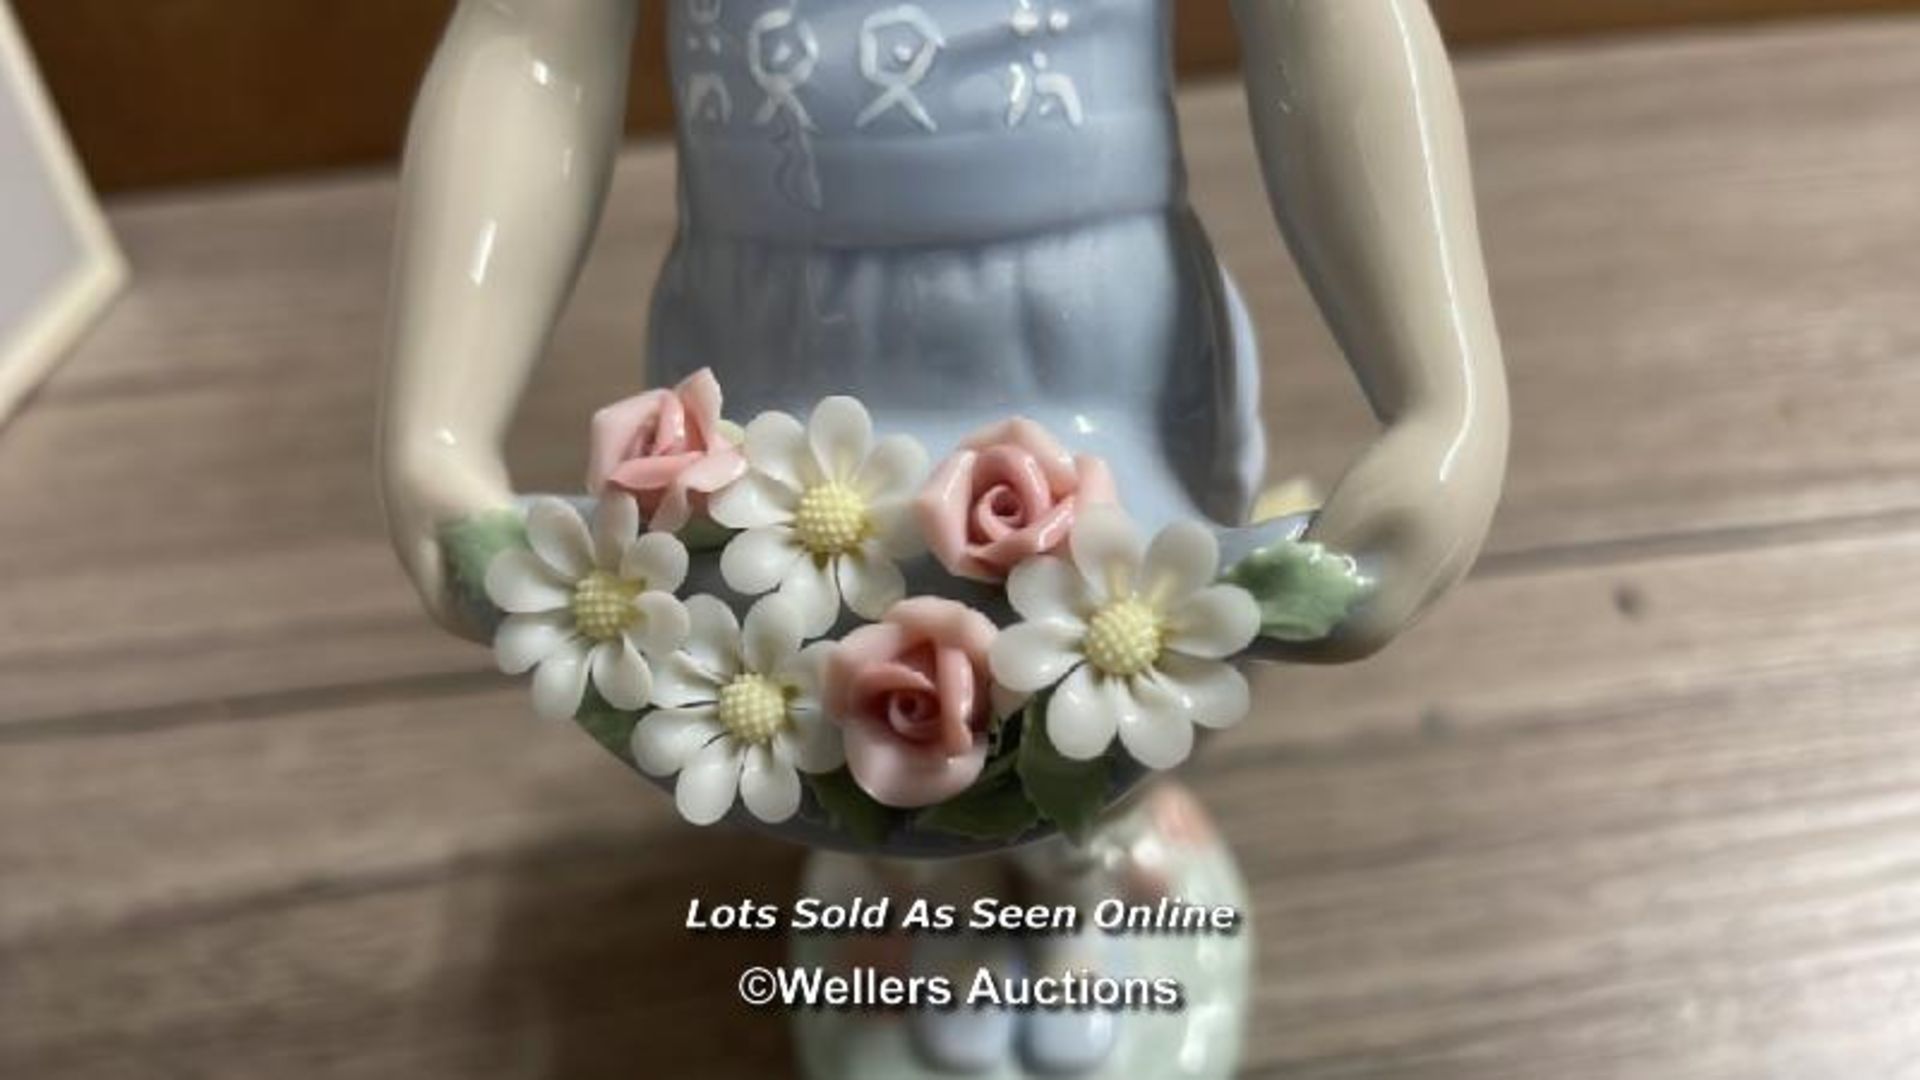 LLADRO "FLOWERS ON THE LAP" NO.01284, BOXED - Image 4 of 10